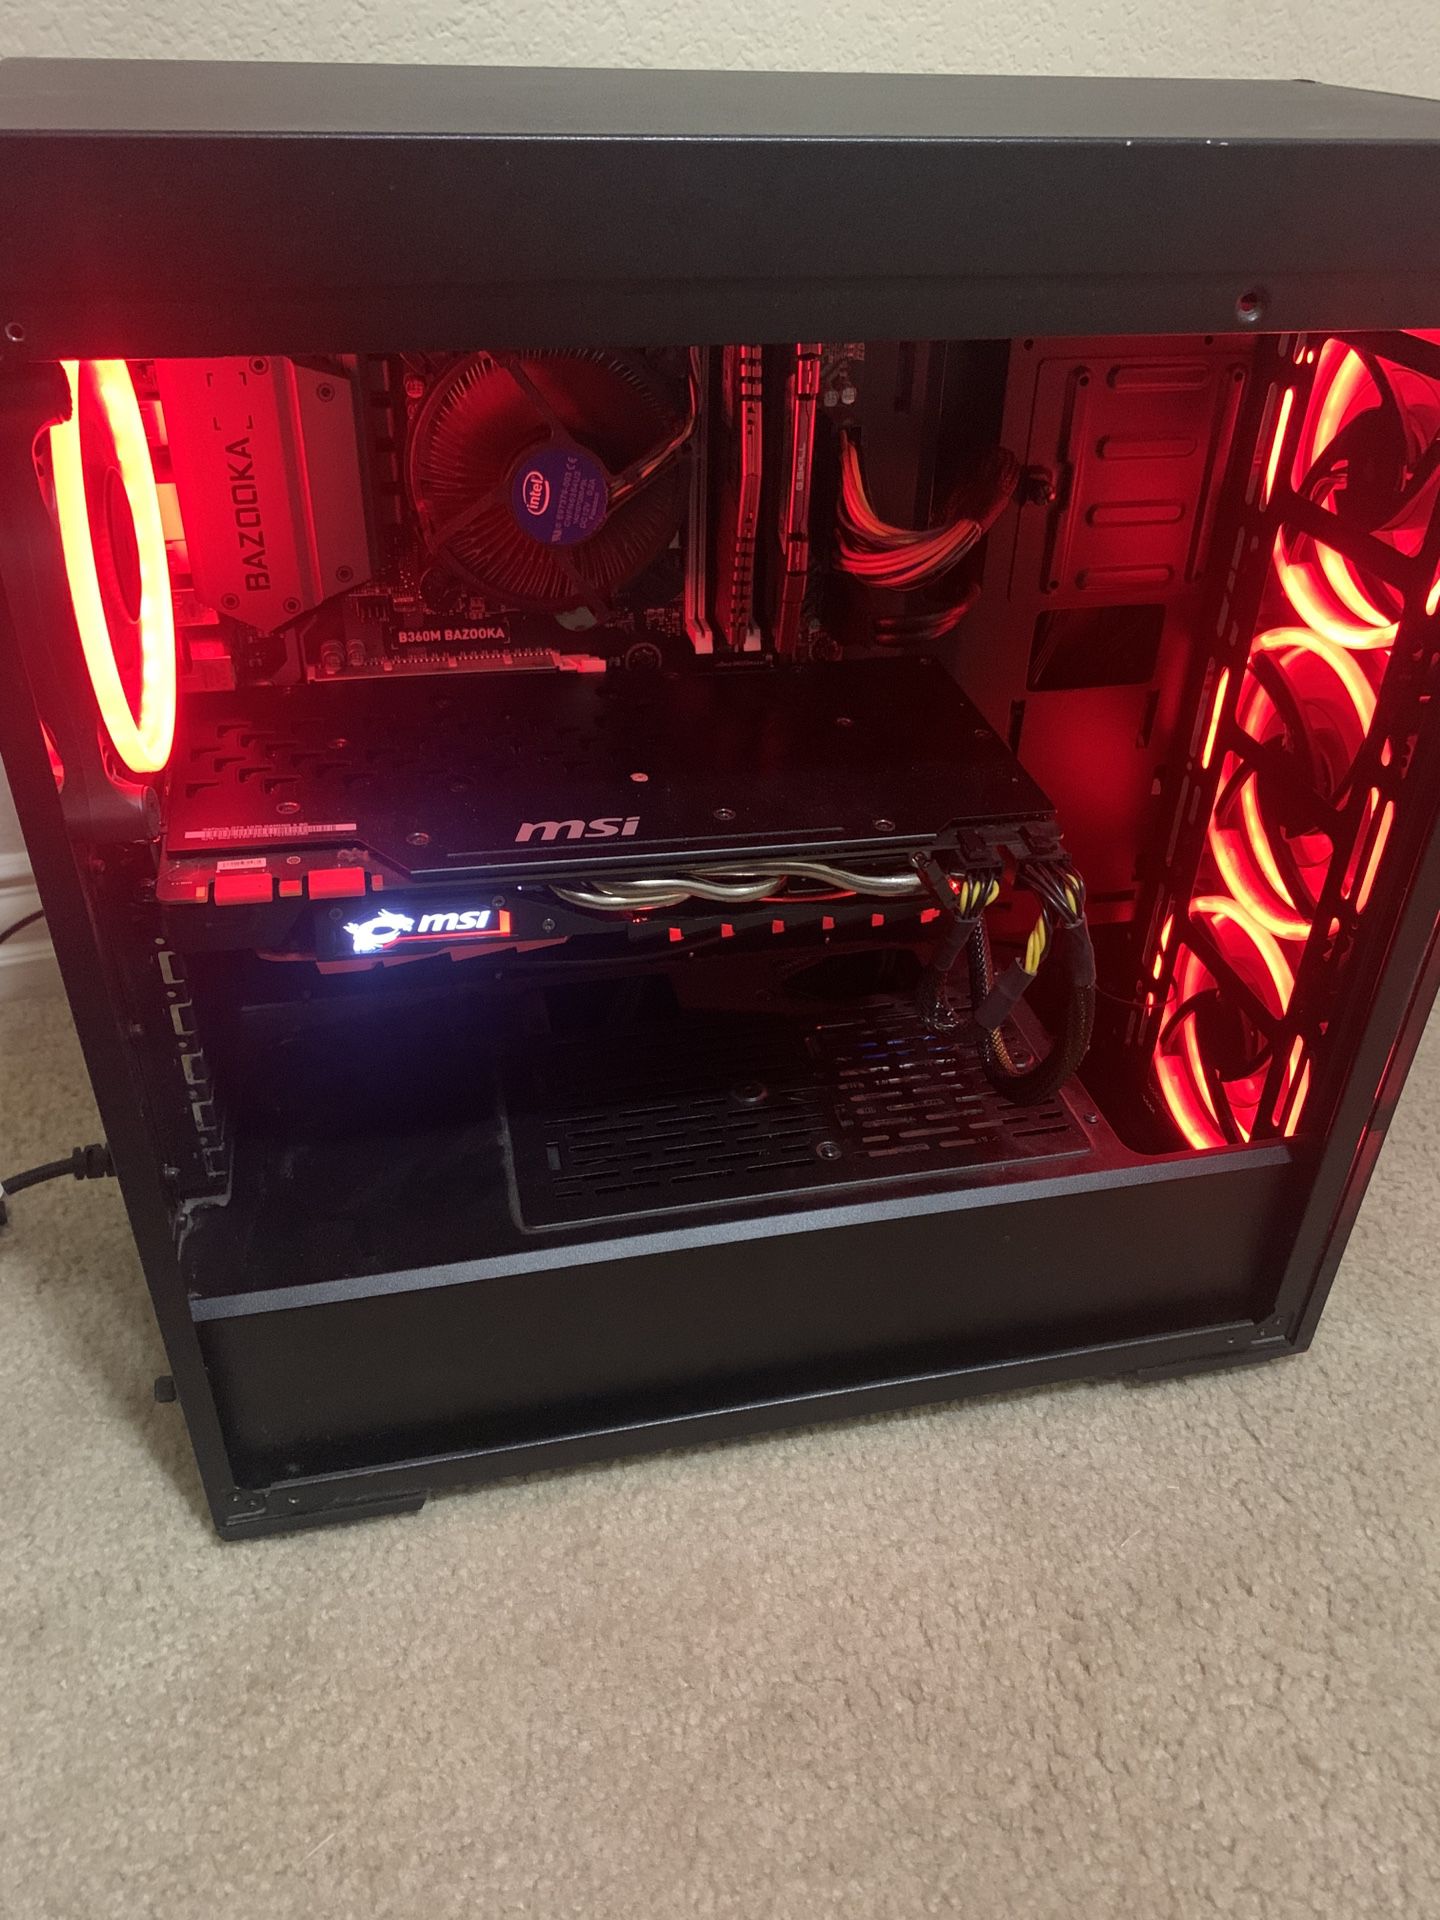 Great Computer 1080p and 1440p Gaming Pc